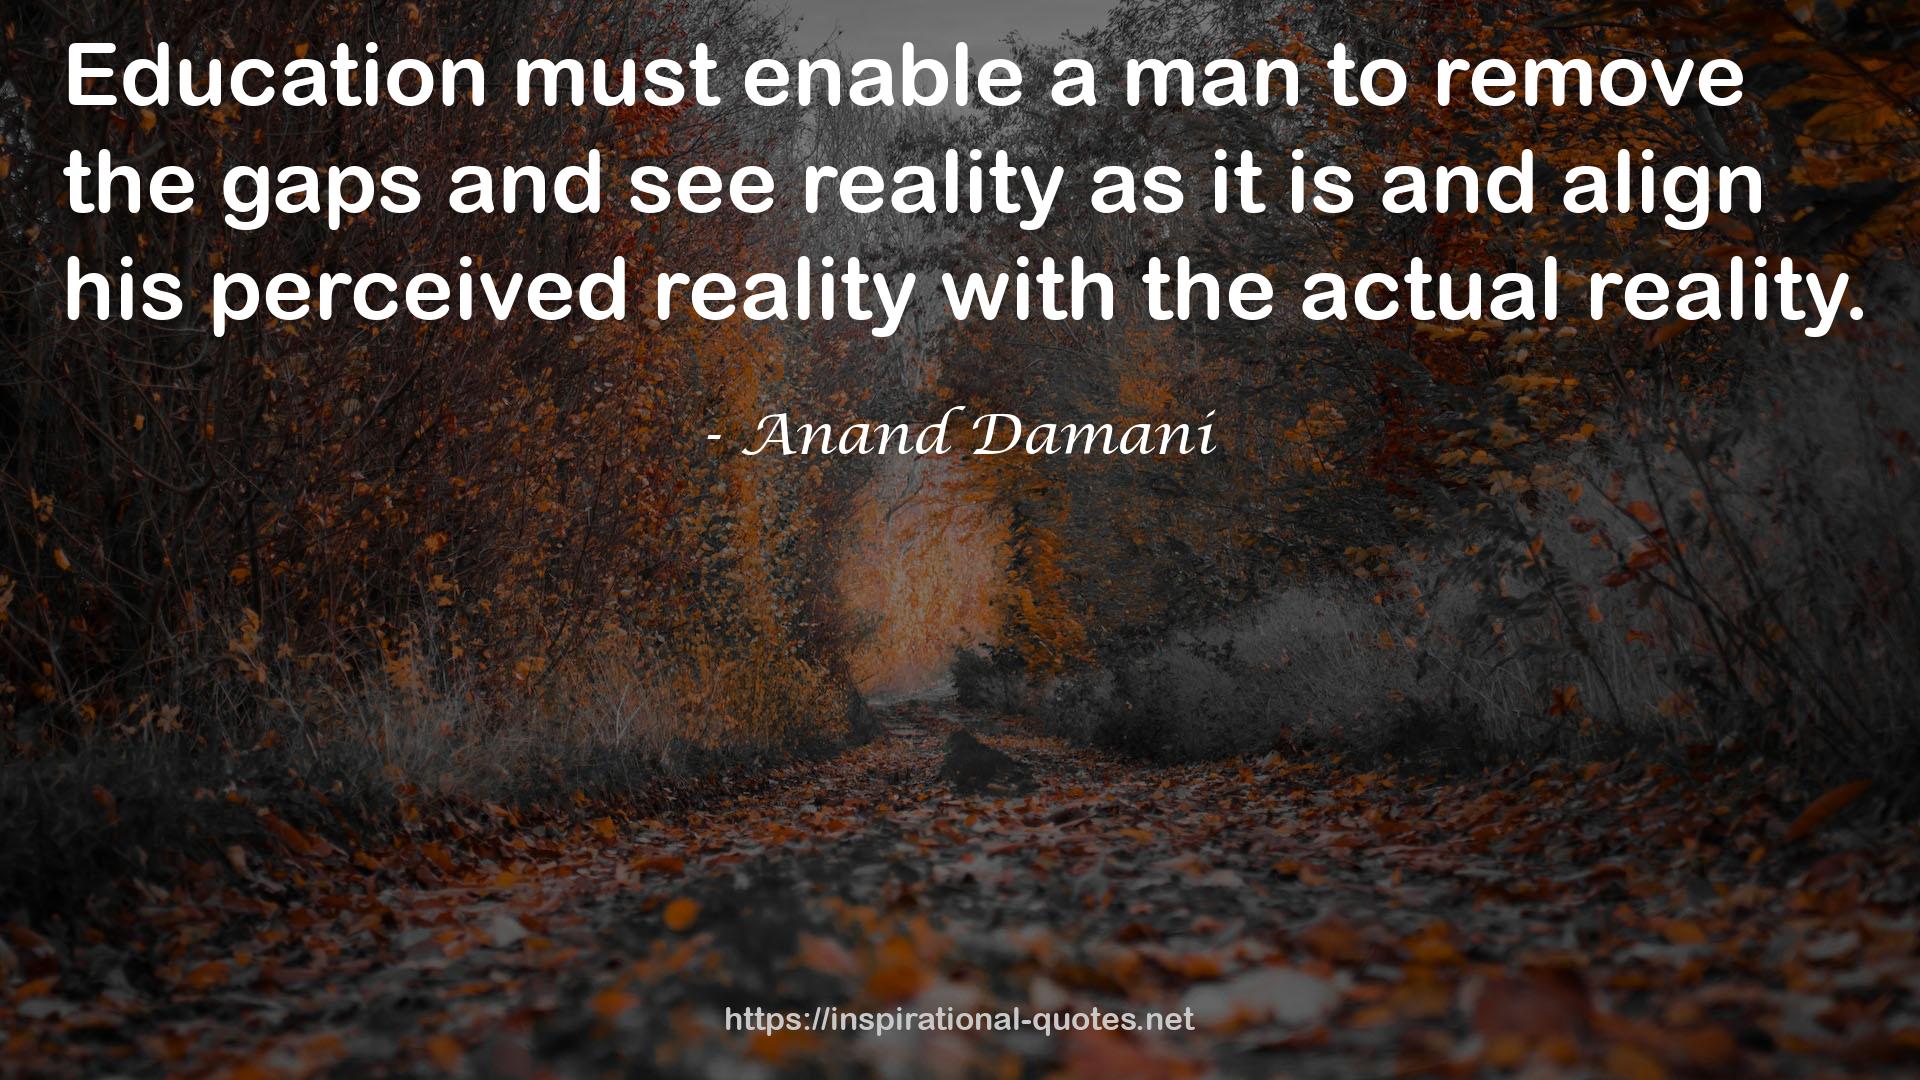 Anand Damani QUOTES